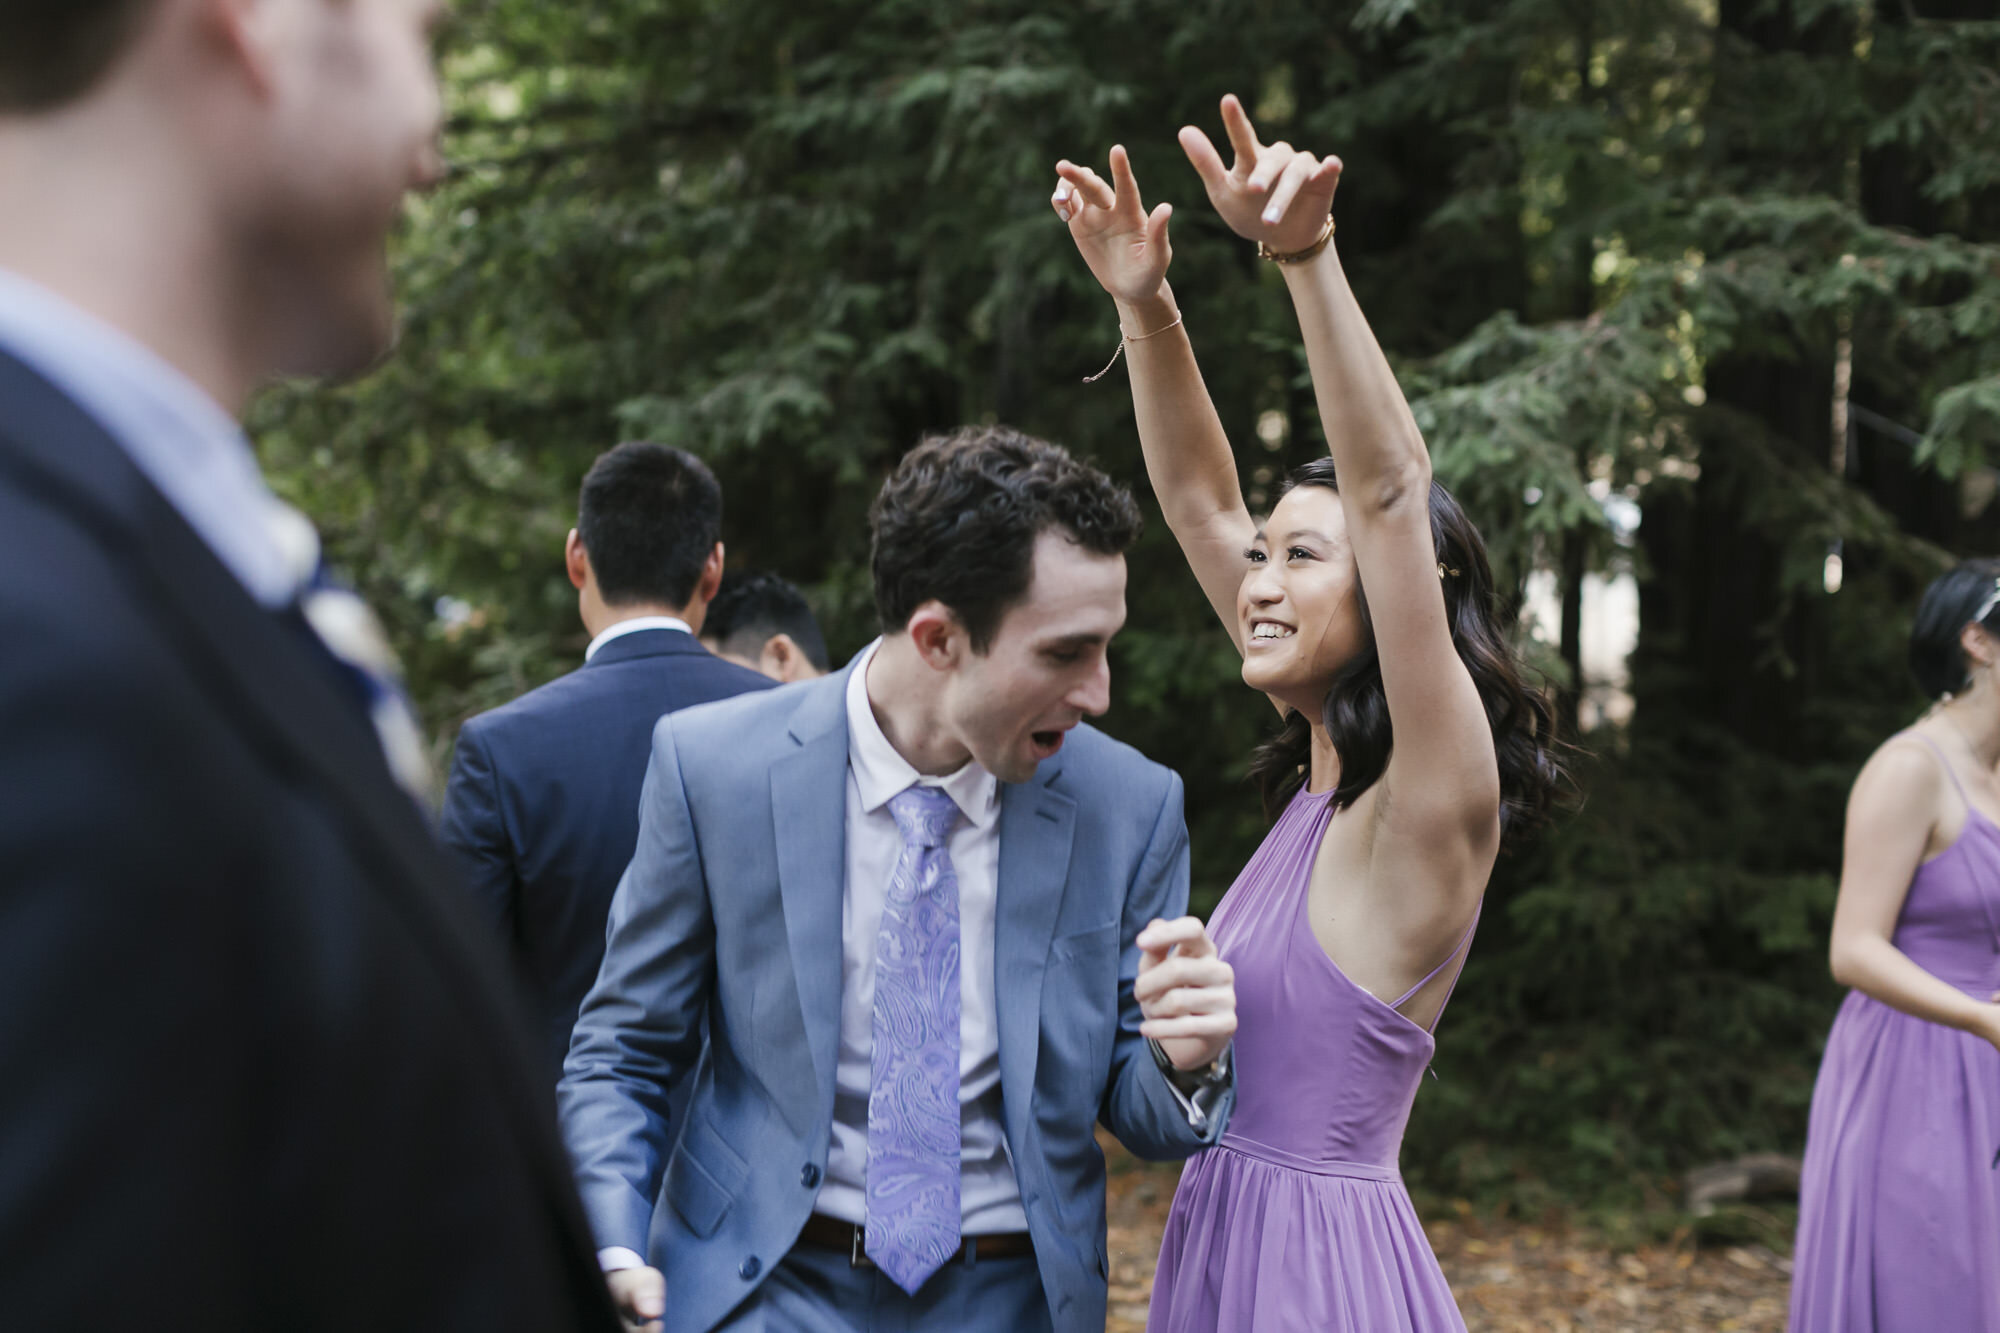 Guests enjoy dancing outdoors in a redwood forest